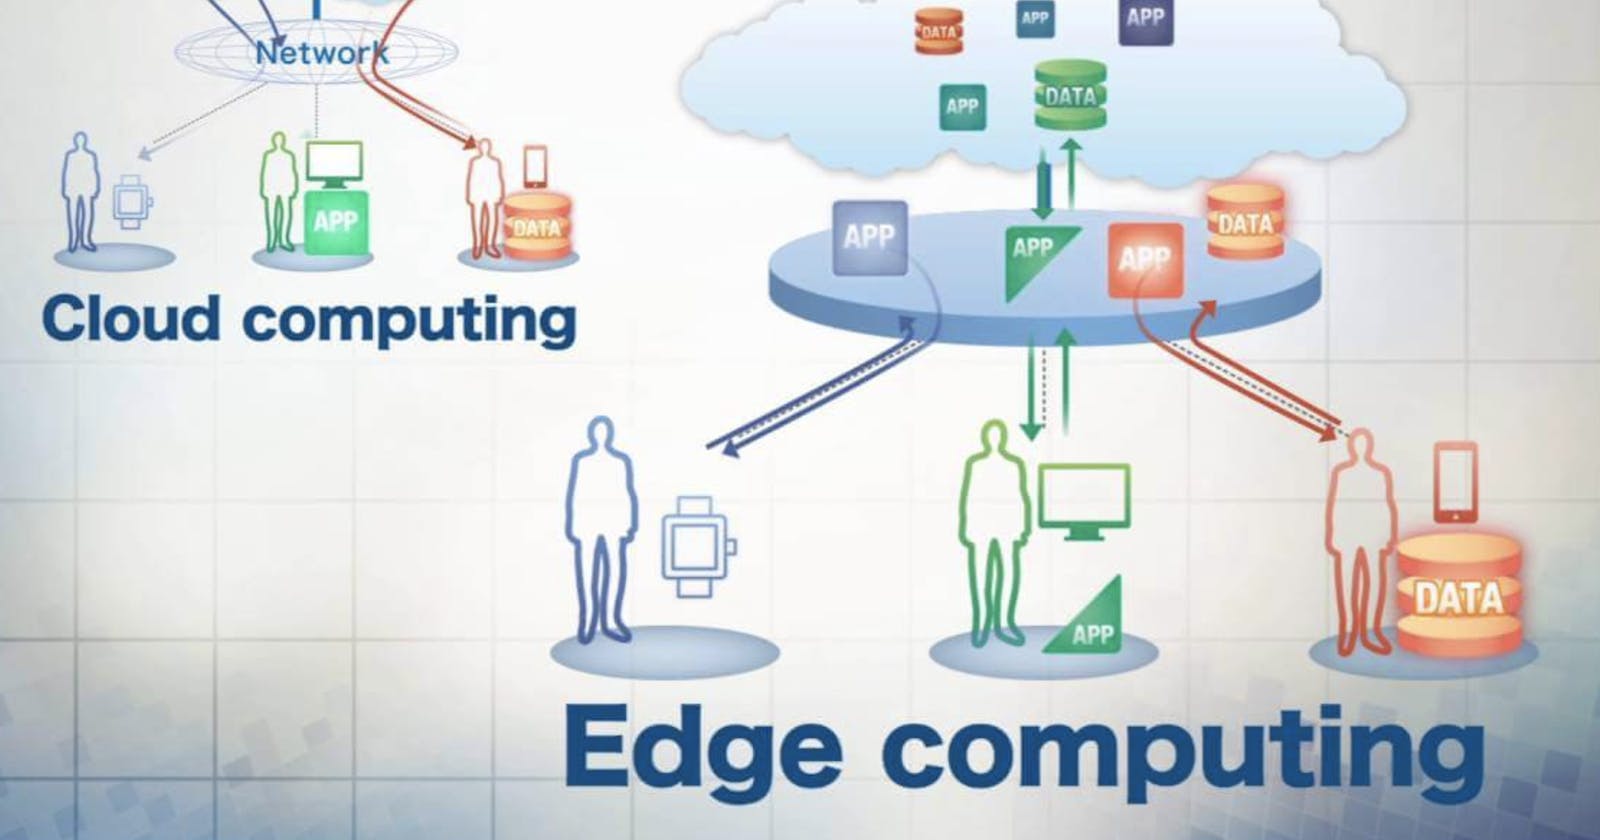 What is edge computing and why does it matter?